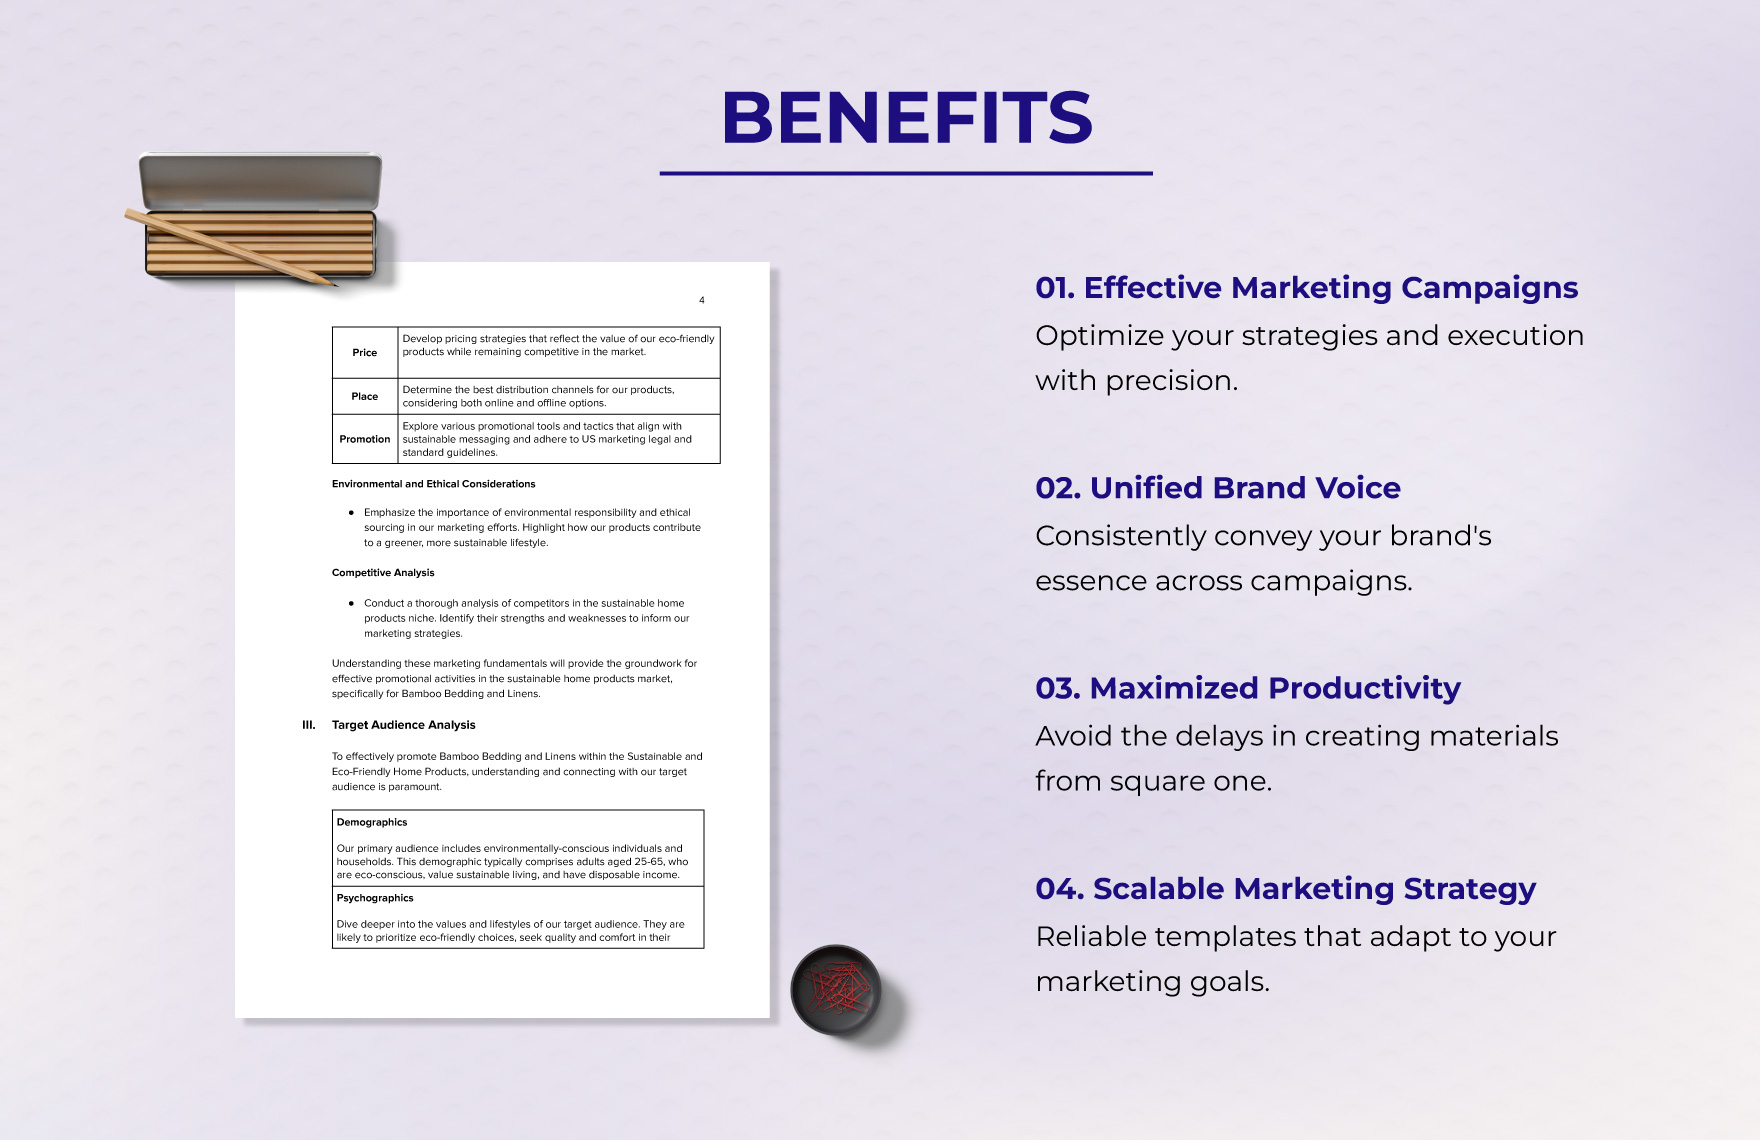 Marketing Training Manual for Promotional Activities Template